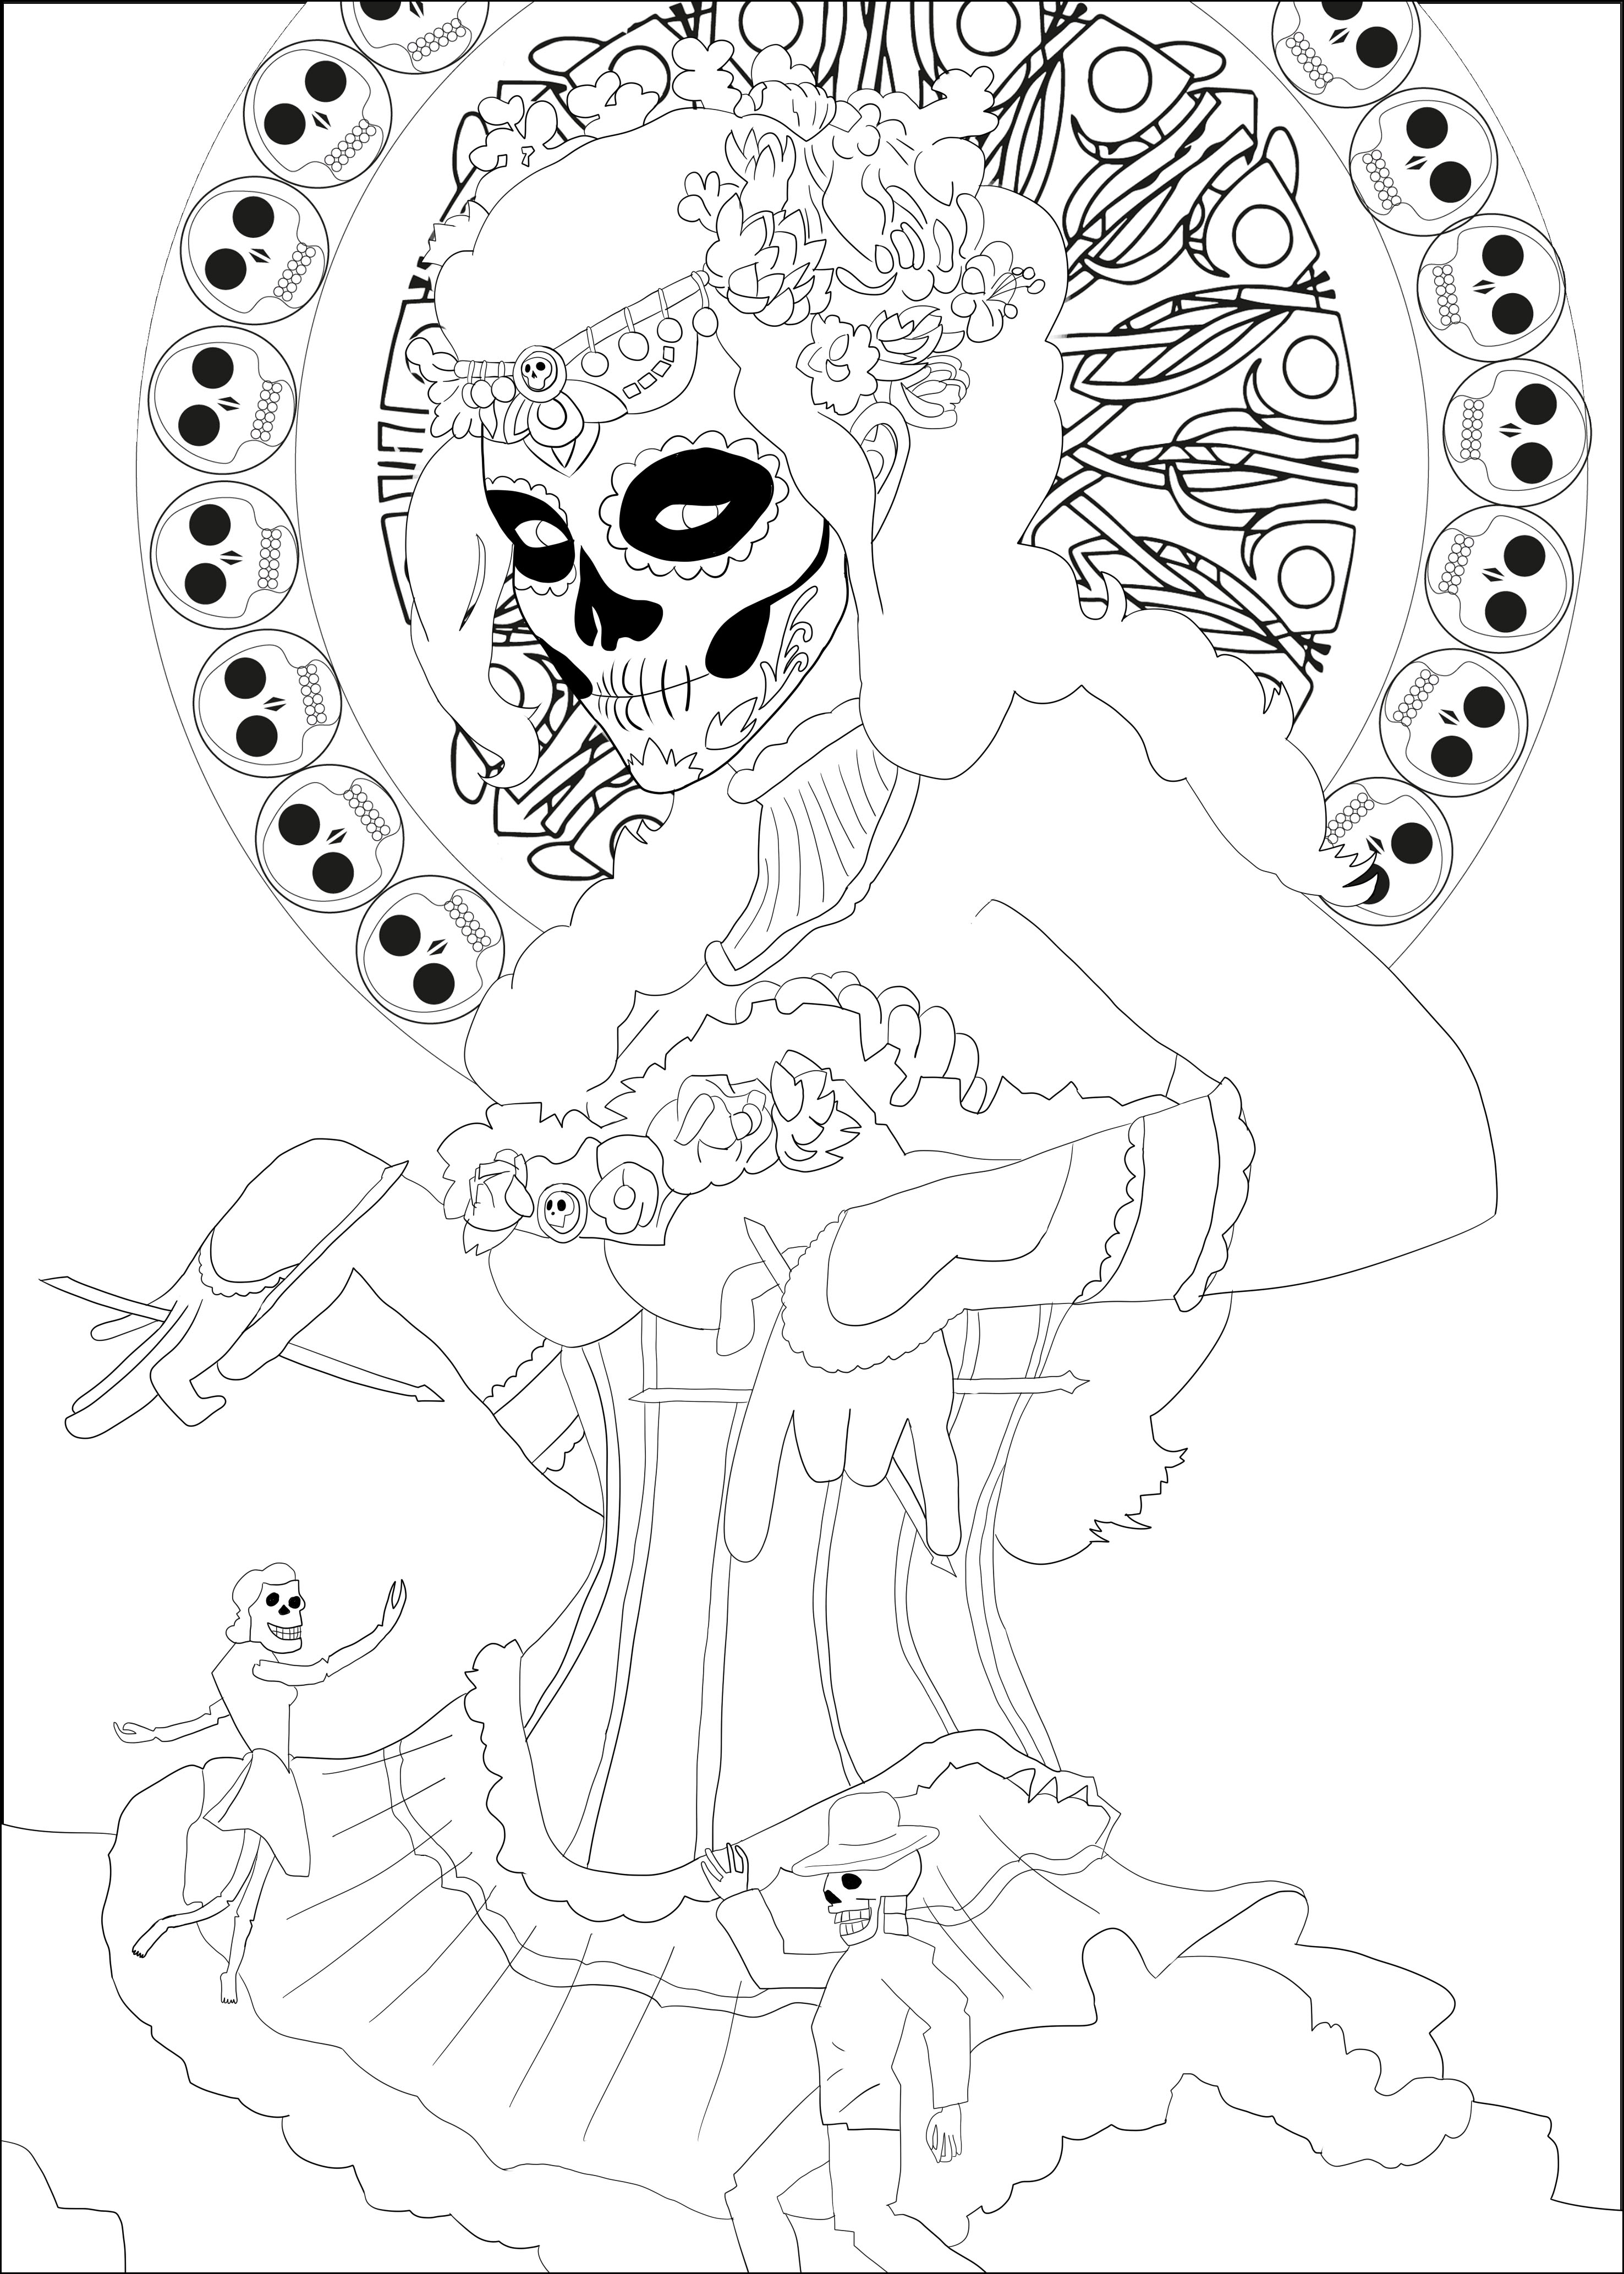 Let s have a look at our coloring page inspired from this celebration